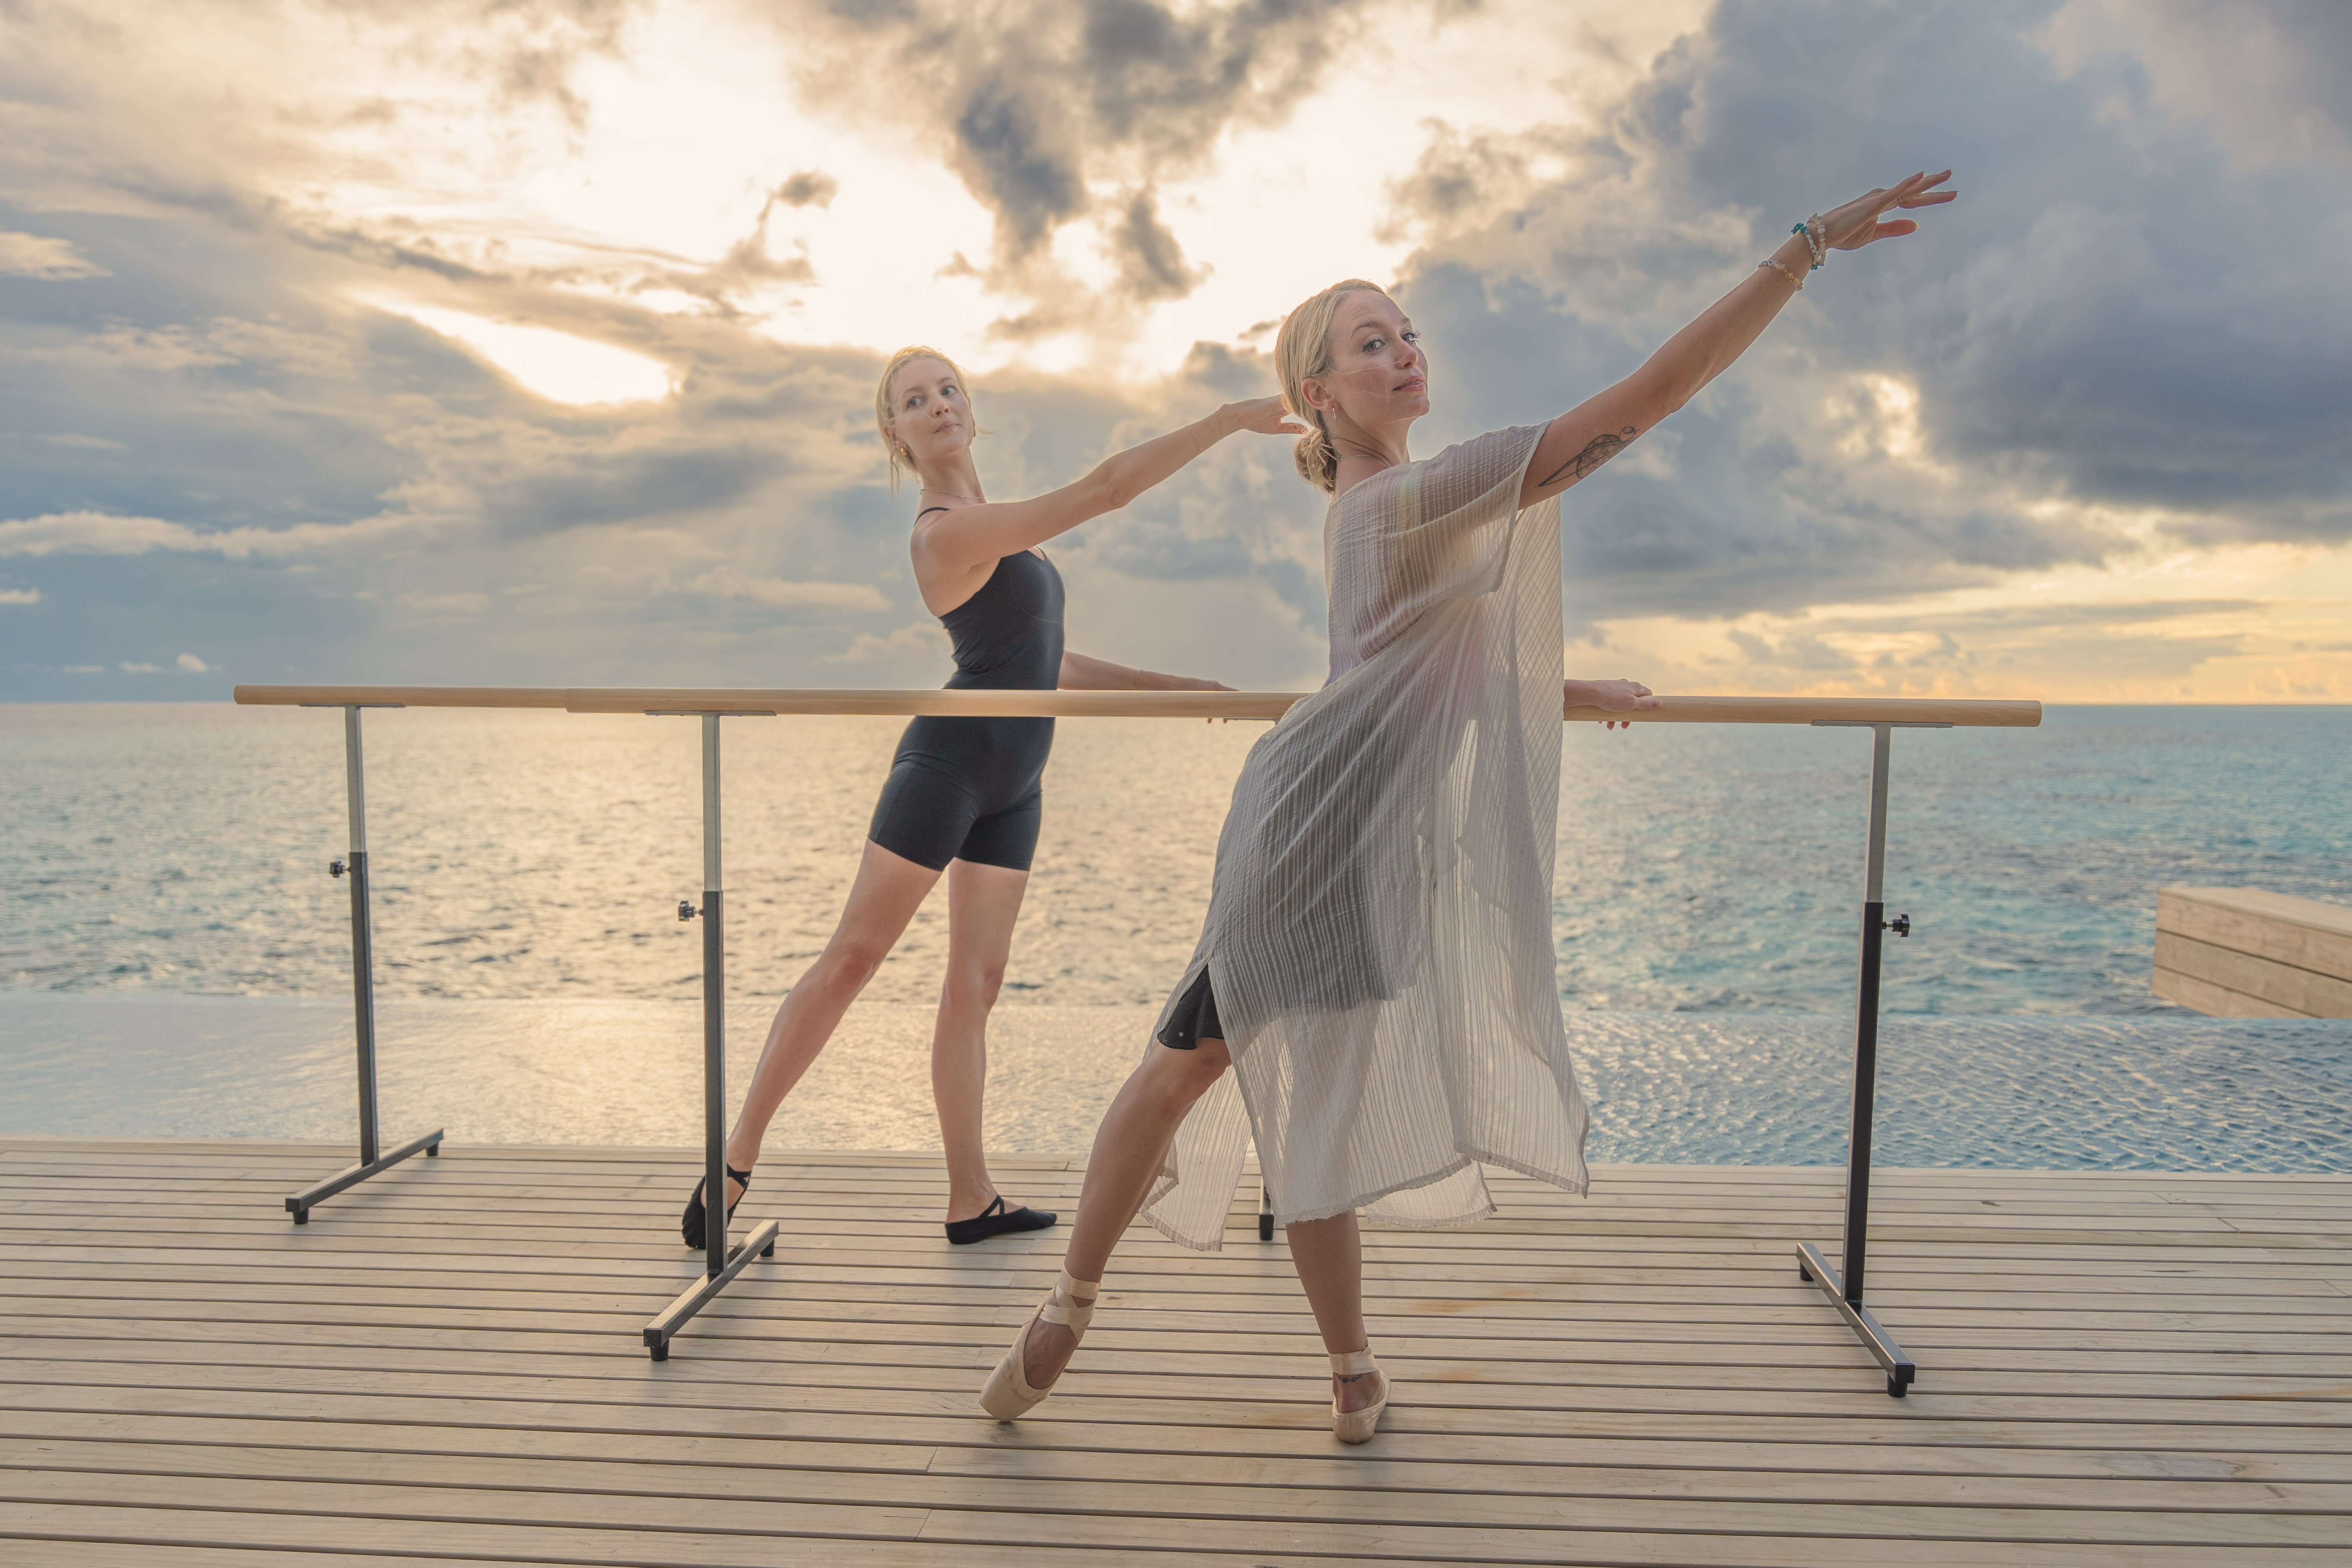 Two women, Karis Scarlette on the right, striking a ballet pose infront of the ocean at Avani+ Fares Maldives Resort.